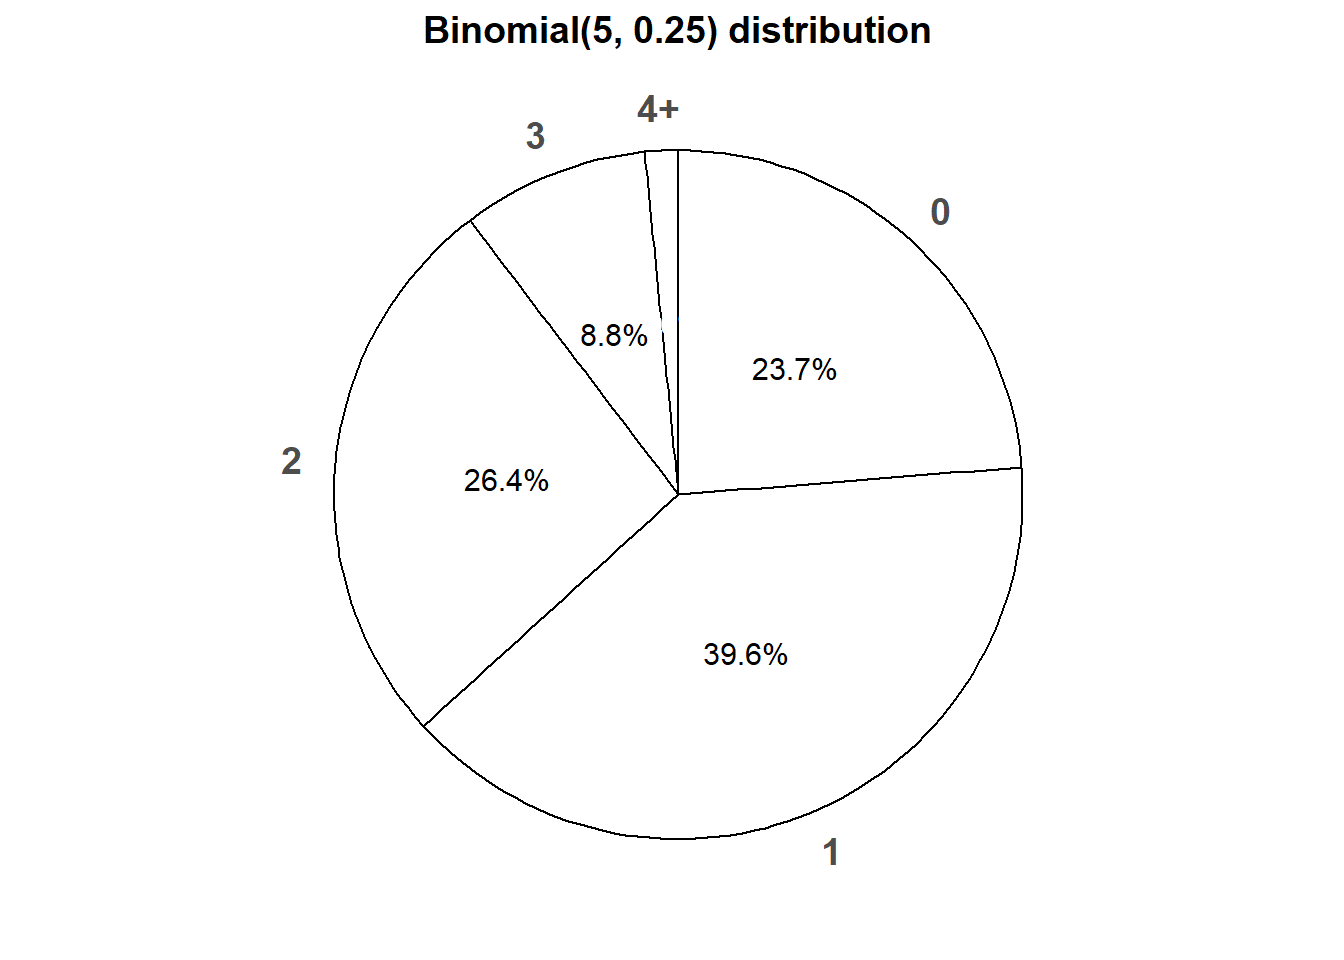 Spinner corresponding to the Binomial(5, 0.25) distribution.